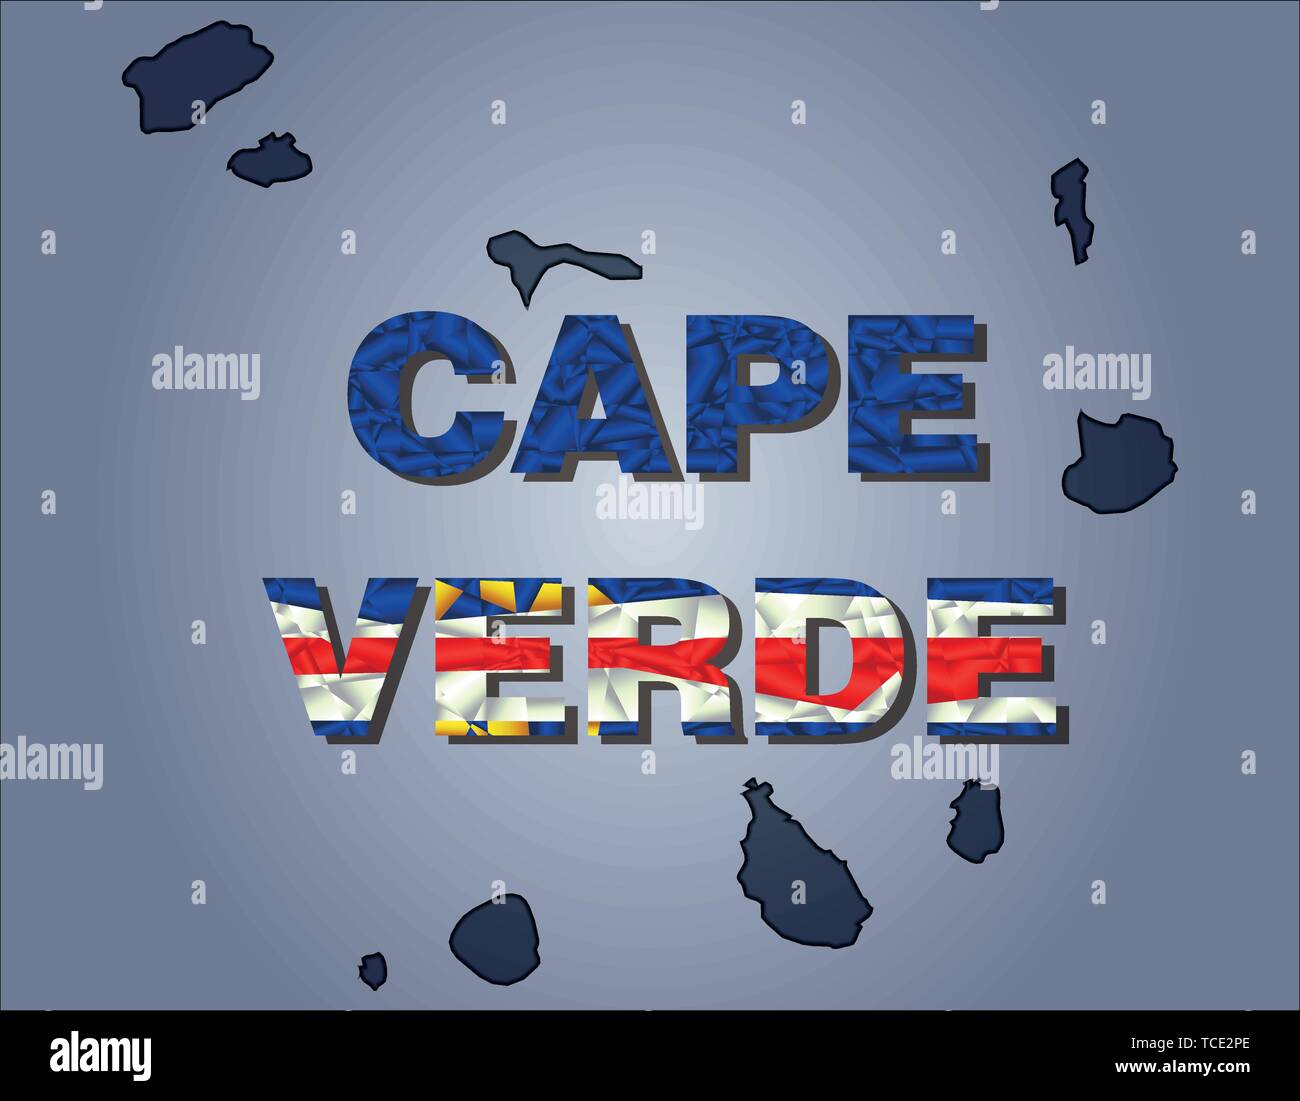 The contours of territory of Capa Verde islands and Capa Verde word in colours of the national flag, blue, yellow, white and red. Africa continent Stock Vector